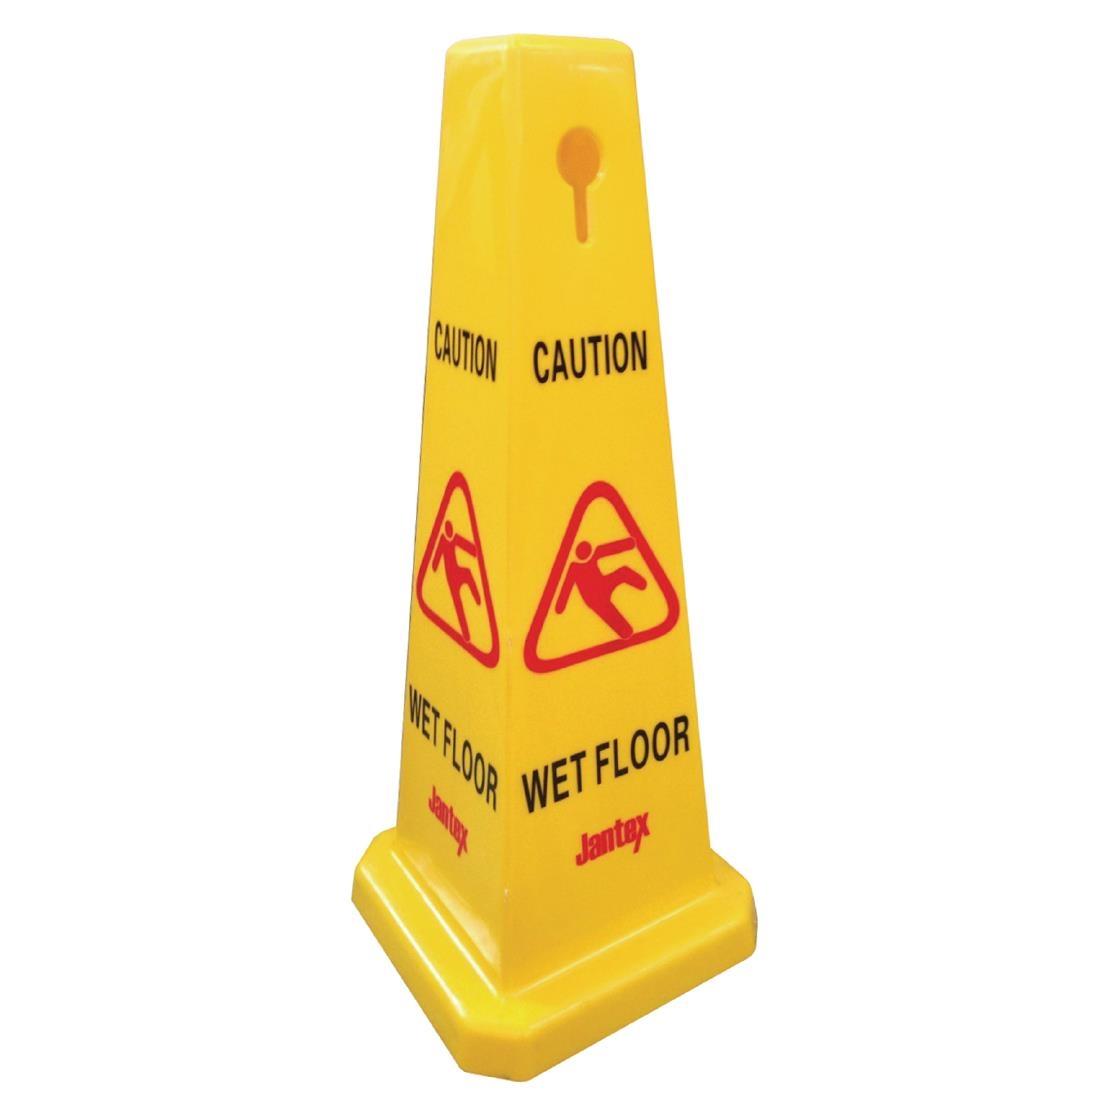 Jantex Cone Wet Floor Safety Sign - L483  - 1